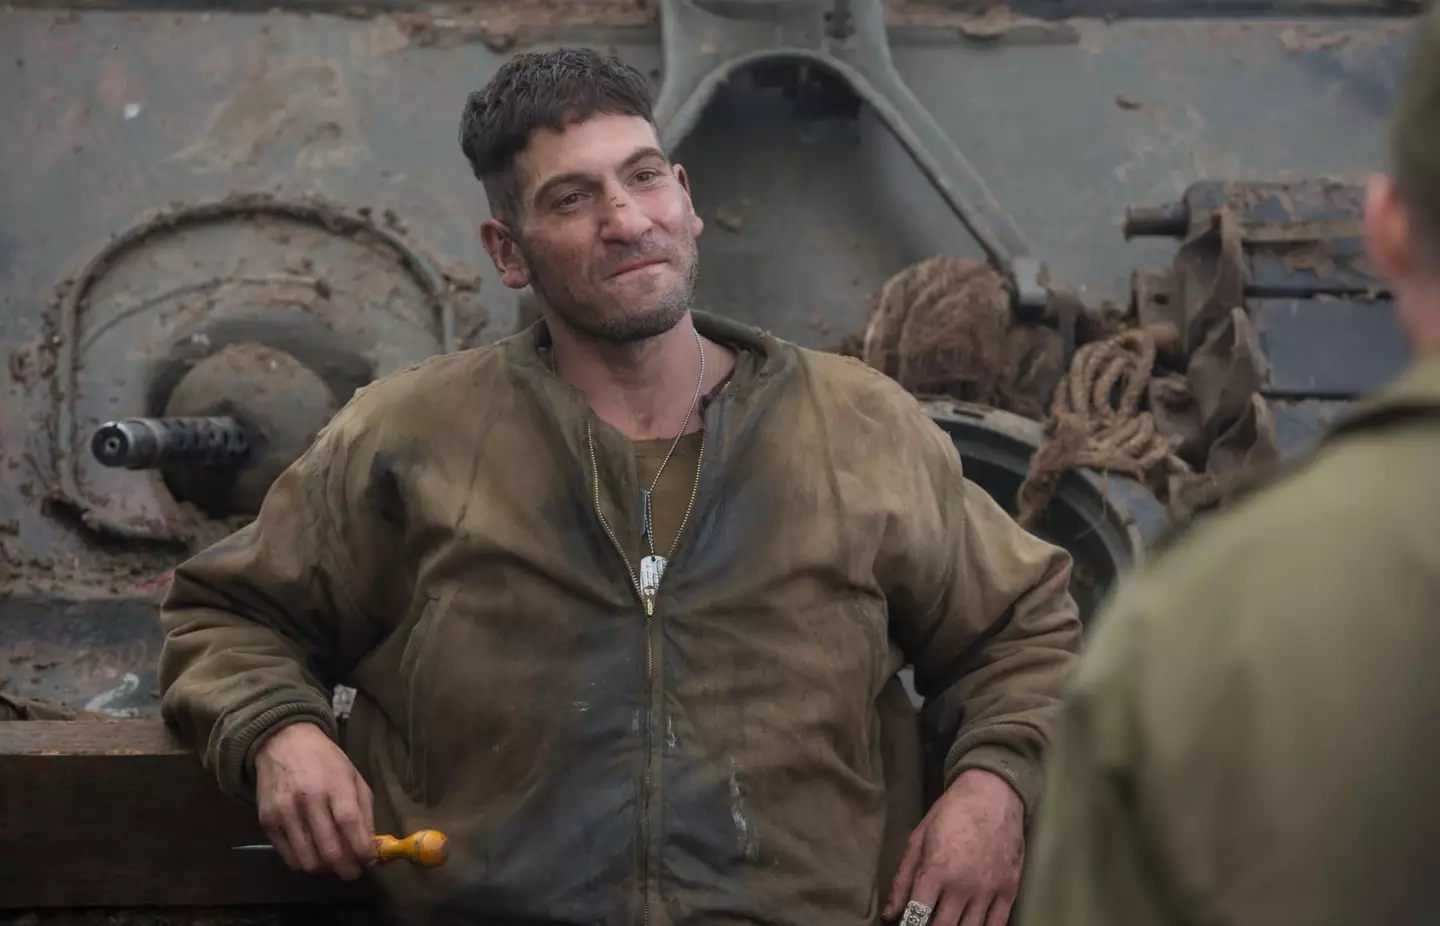 Jon Bernthal said he ended up really enjoying his co-star's efforts, even if they were pretty gruesome (Sony)